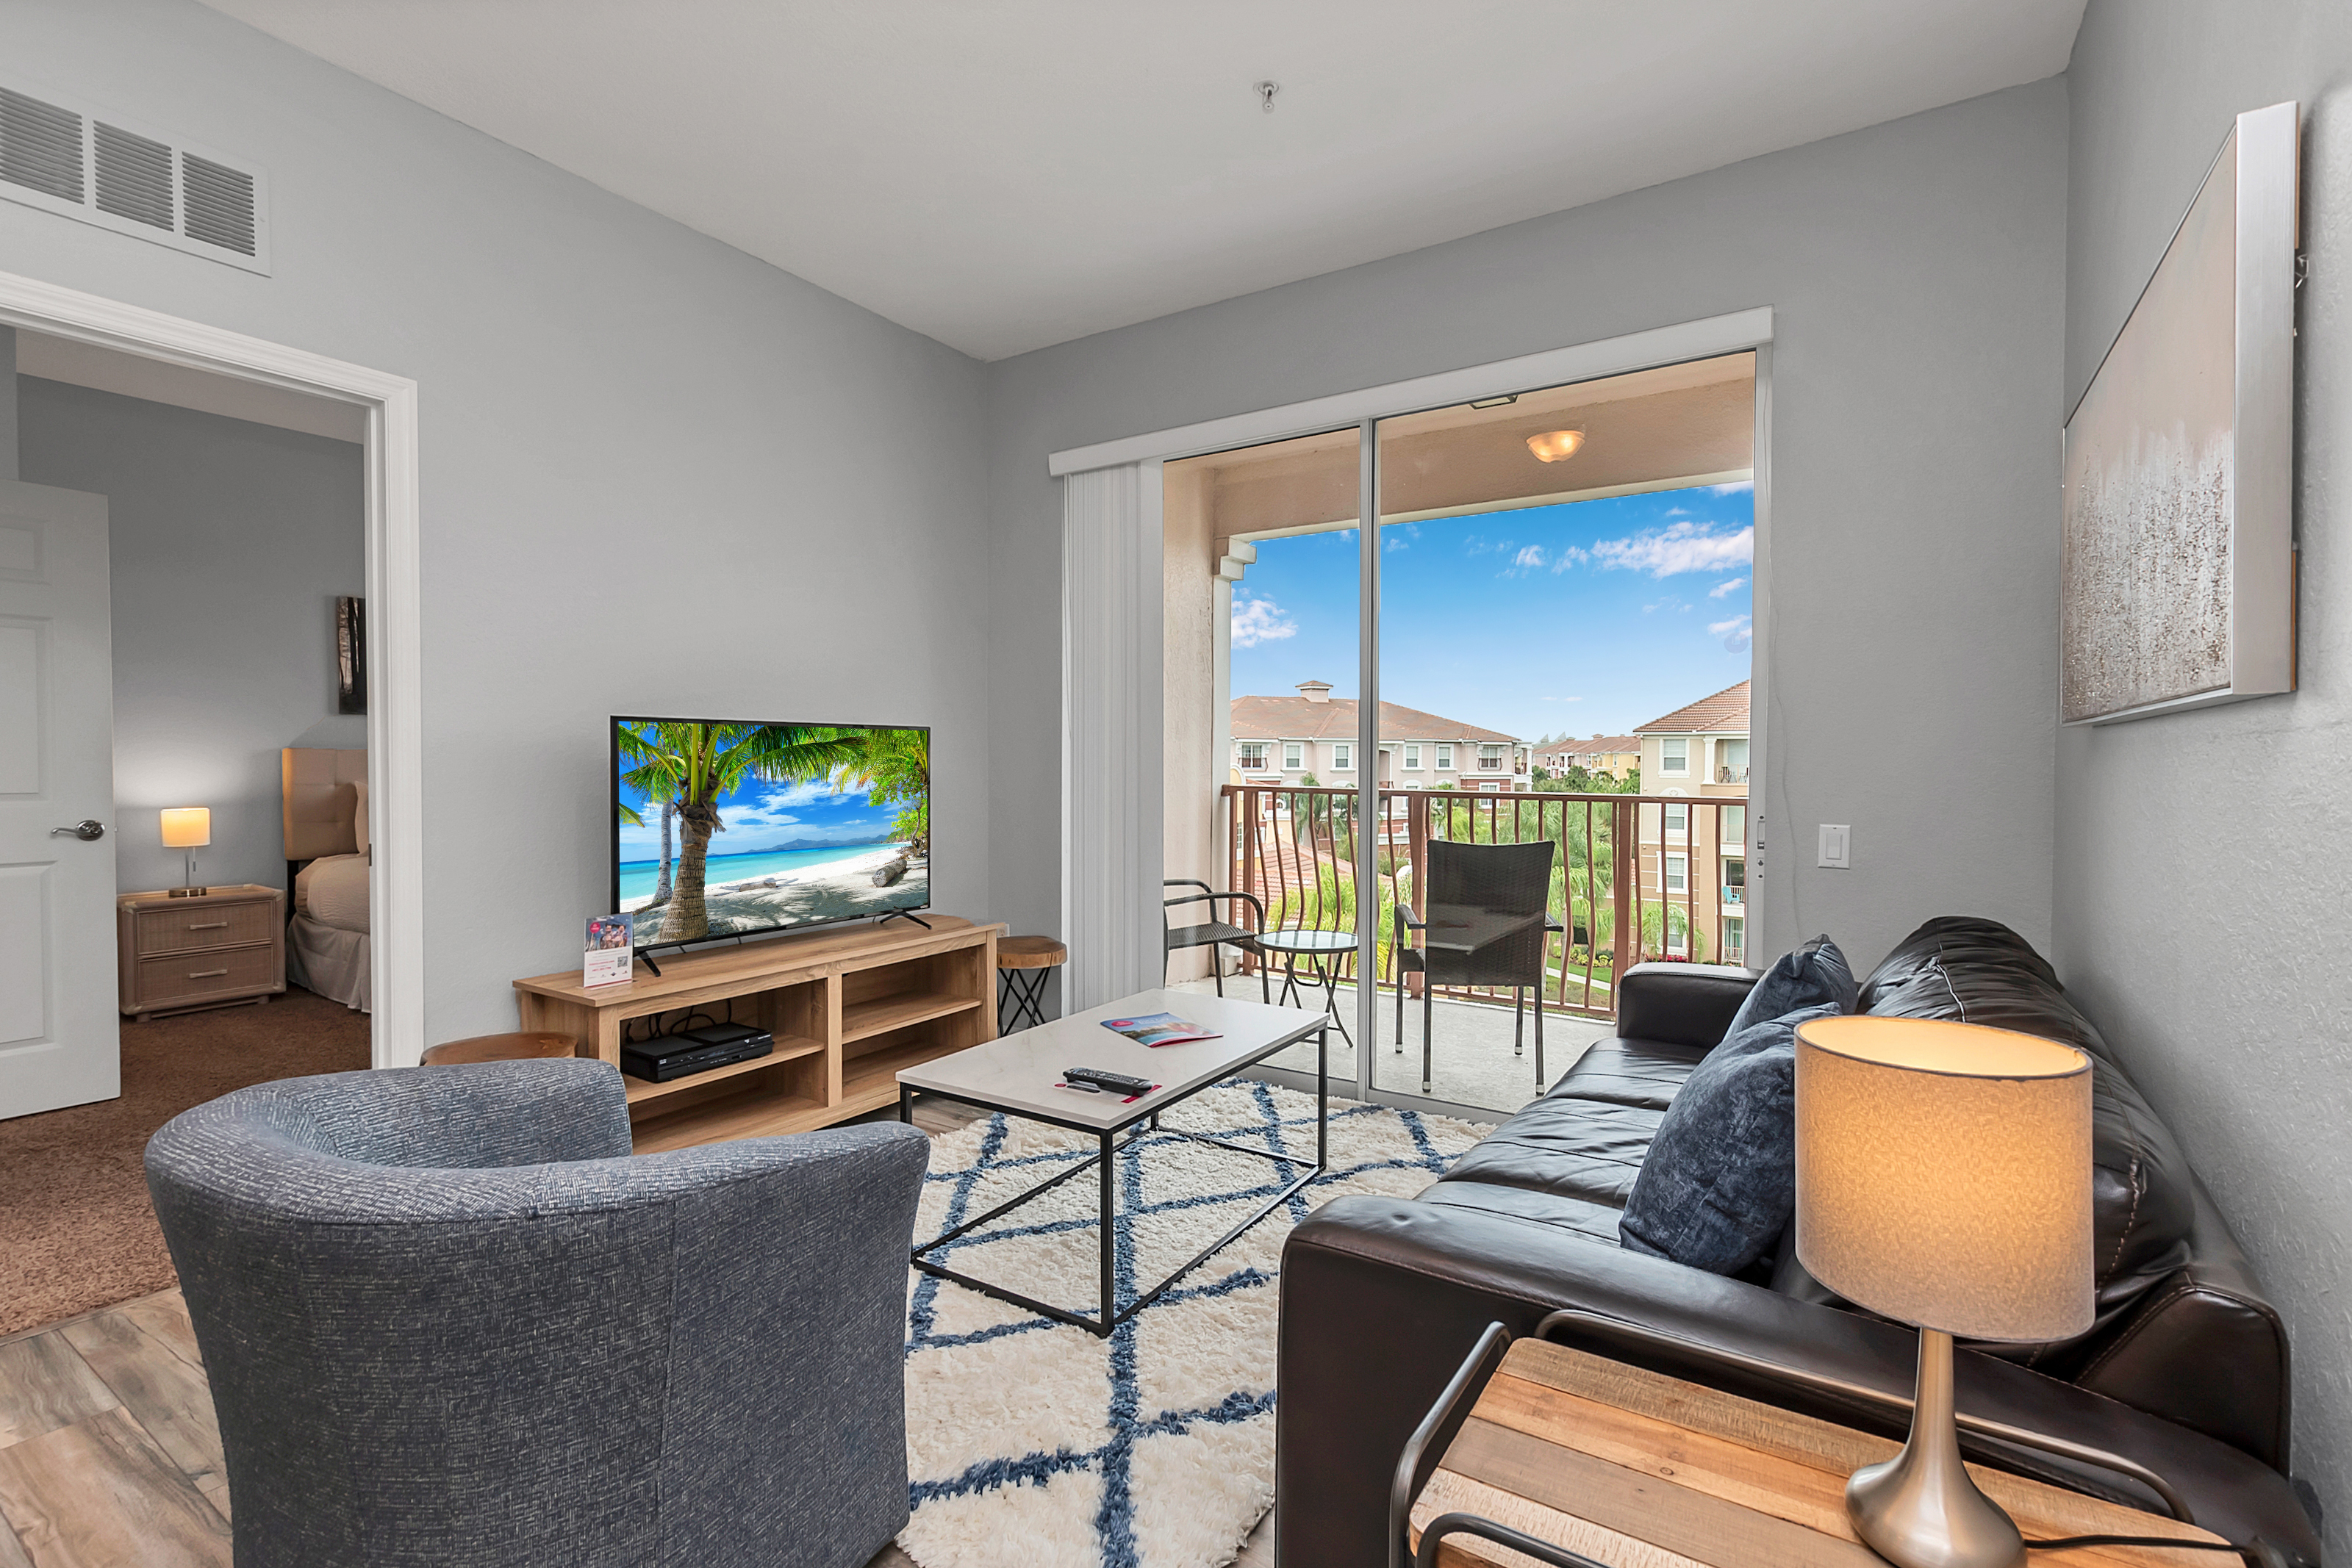 - Enchanting living area of the condo in Orlando Florida - Smart TV and Netflix - Chic and contemporary living area design with modern furnishings - Cozy seating area with sofas - Big and bright sliding doors that leads to the private balcony